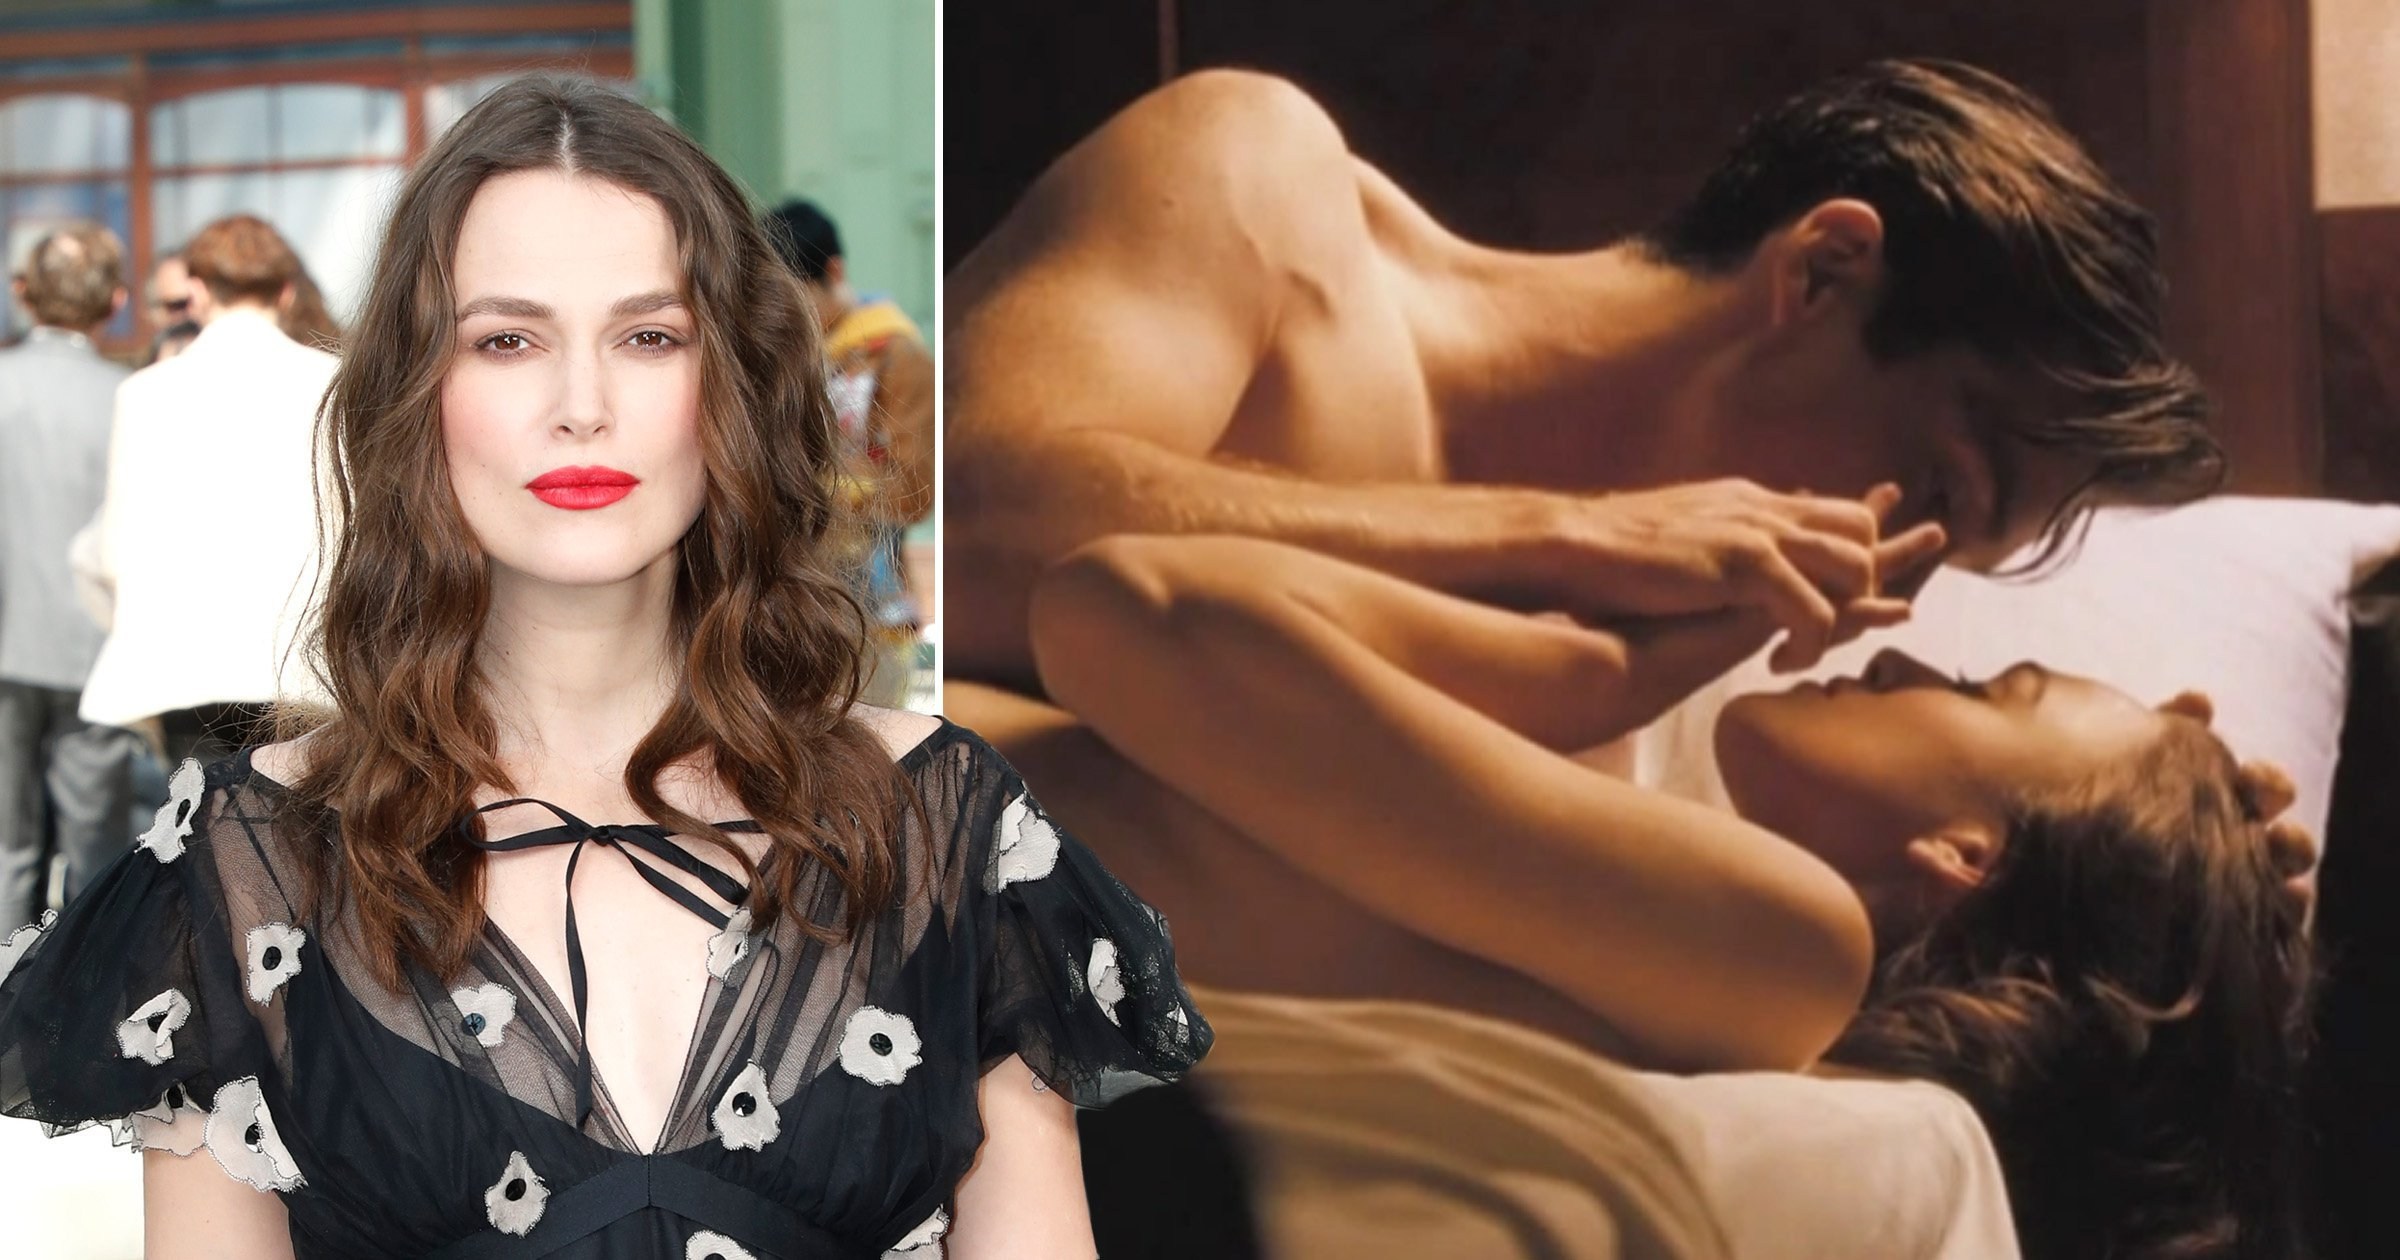 Keira Knightley refuses to film sex scenes directed by men: ‘I feel uncomfortable portraying the male gaze’